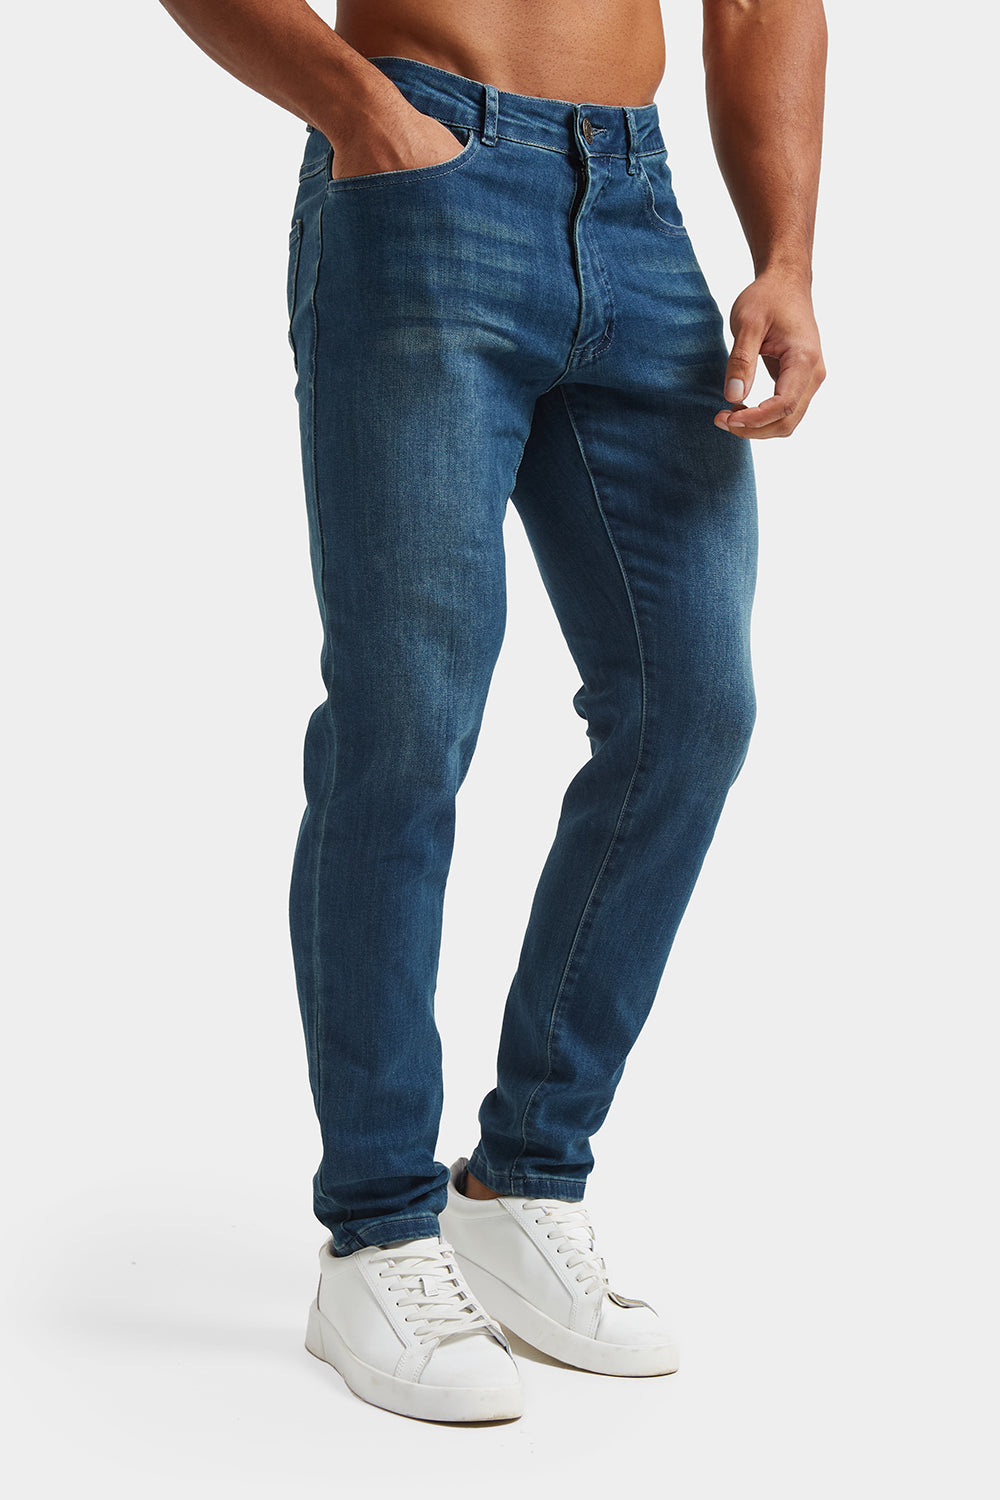 Athletic Fit Jeans in Mid USA - Blue - TAILORED ATHLETE